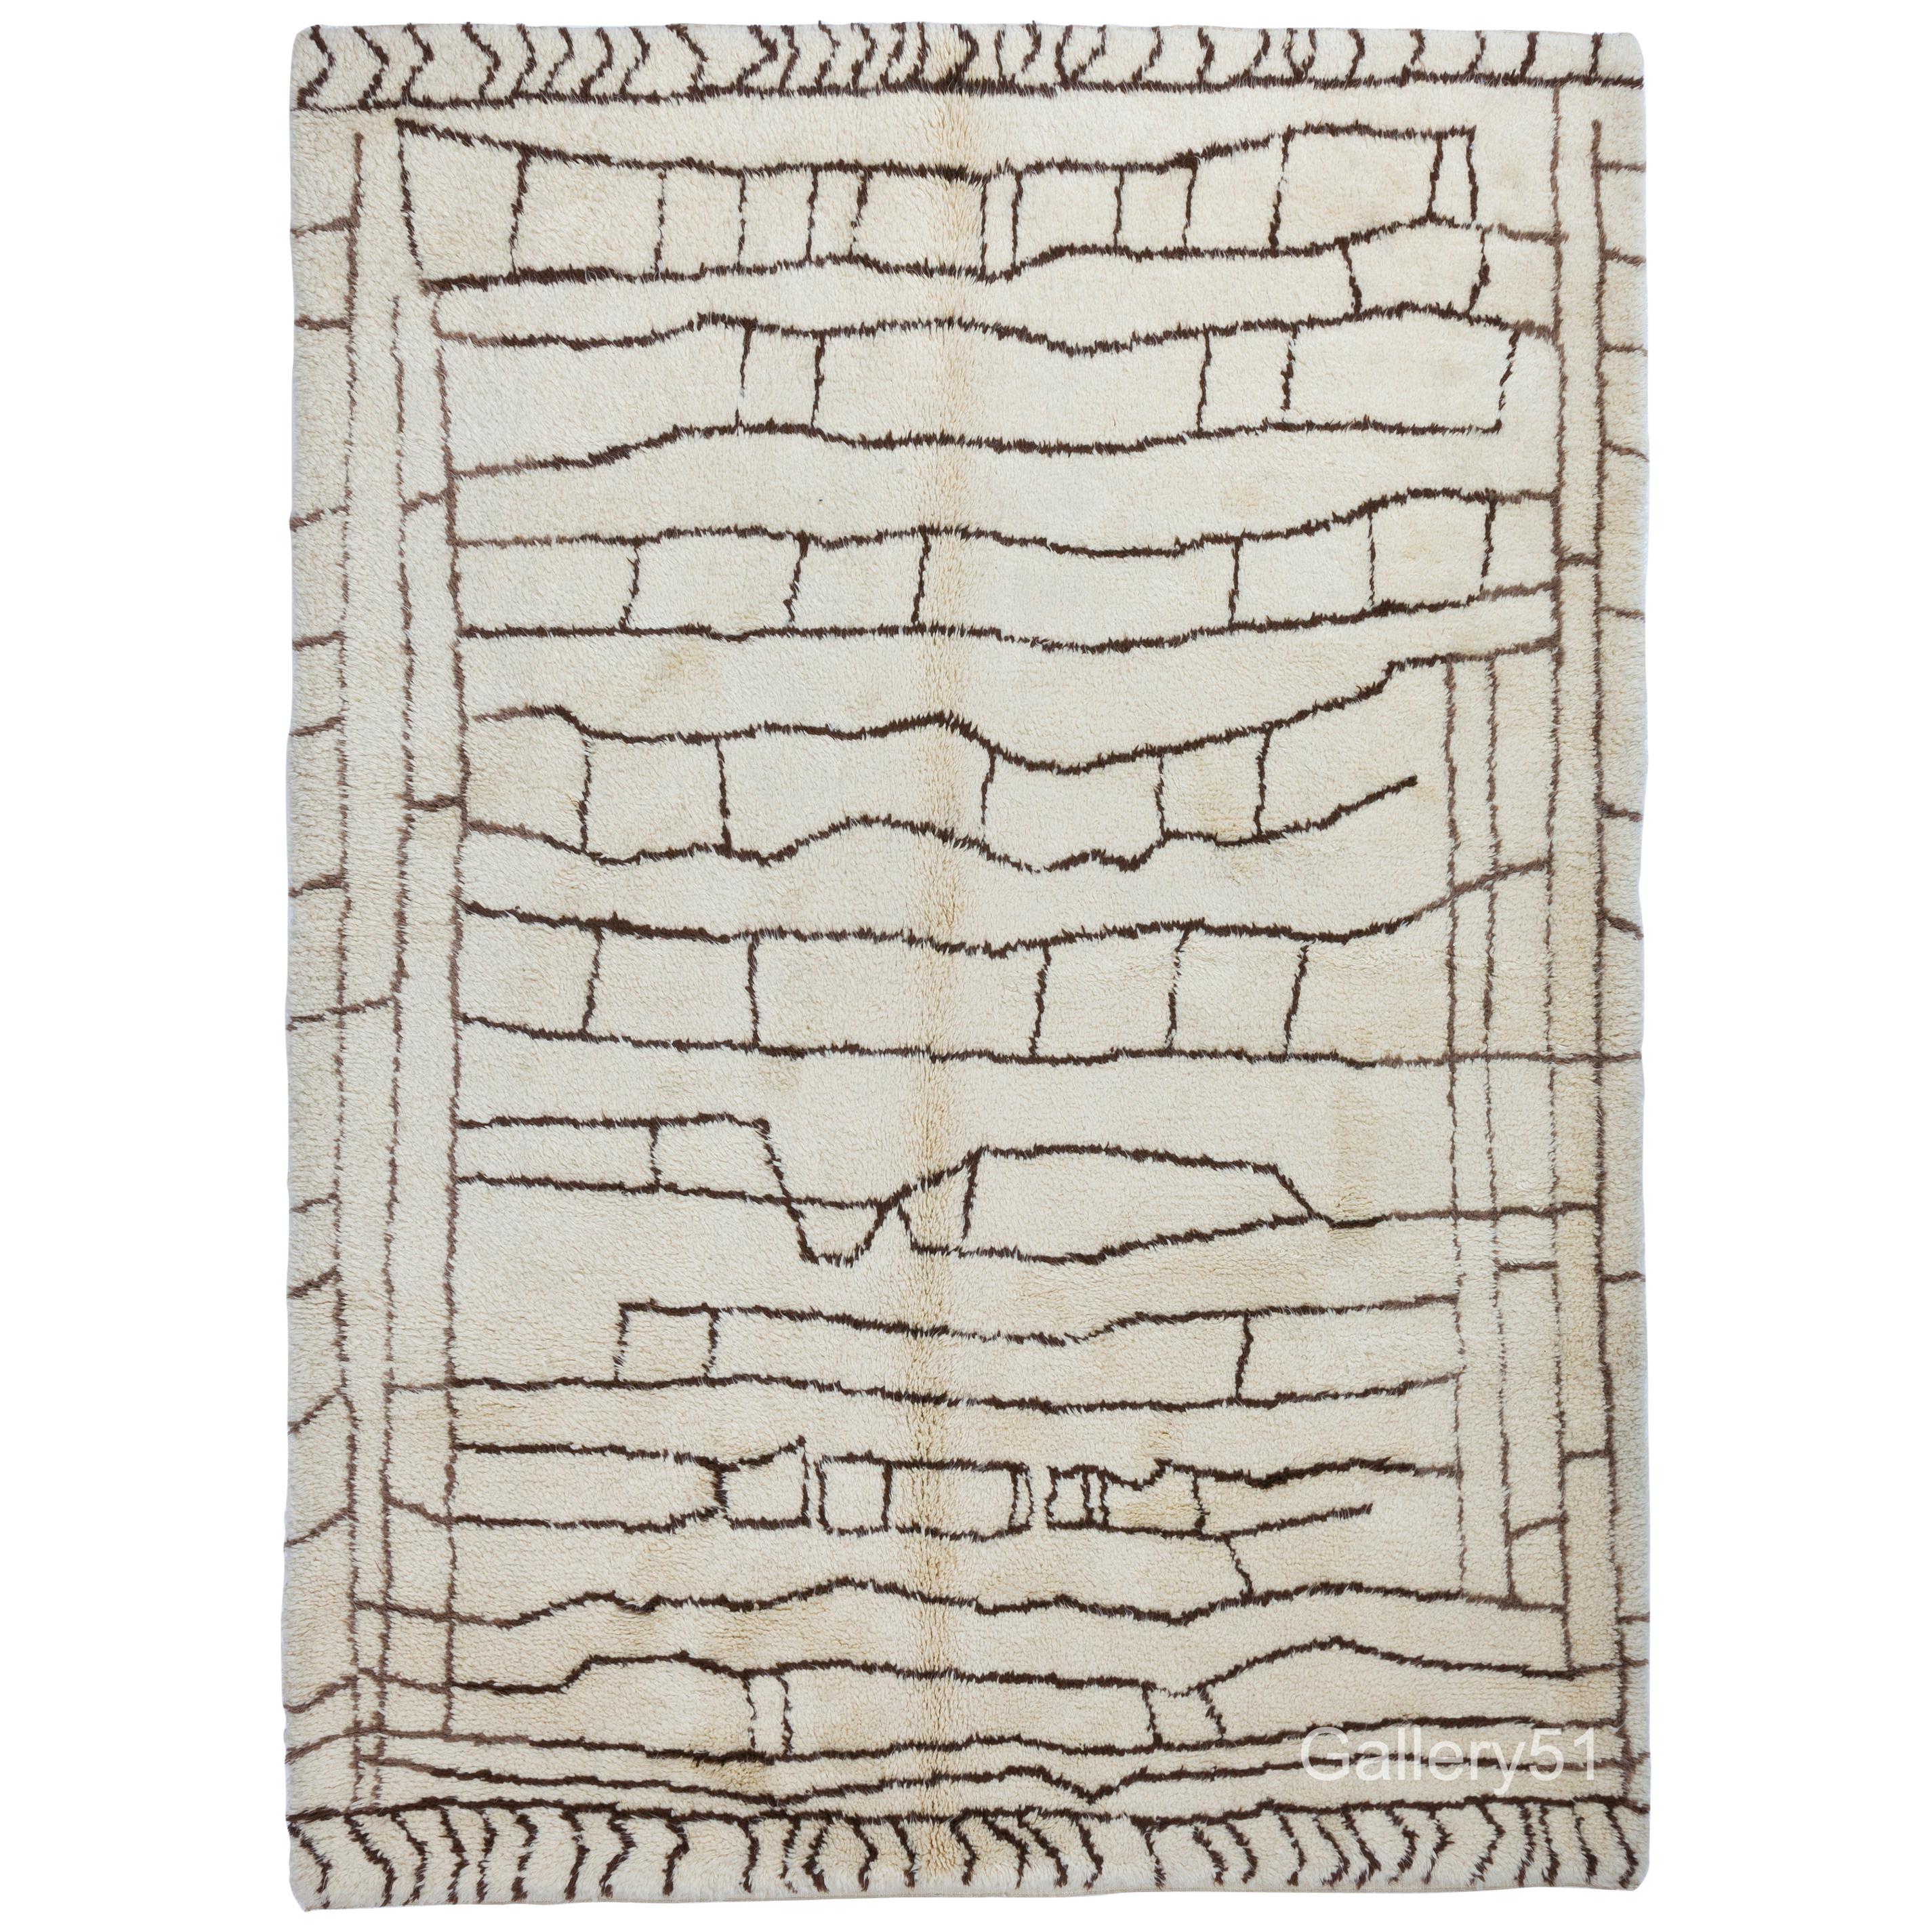 7.5x10 Ft Contemporary Moroccan Beni Ourain Rug Made Of Un-dyed Natural Wool For Sale